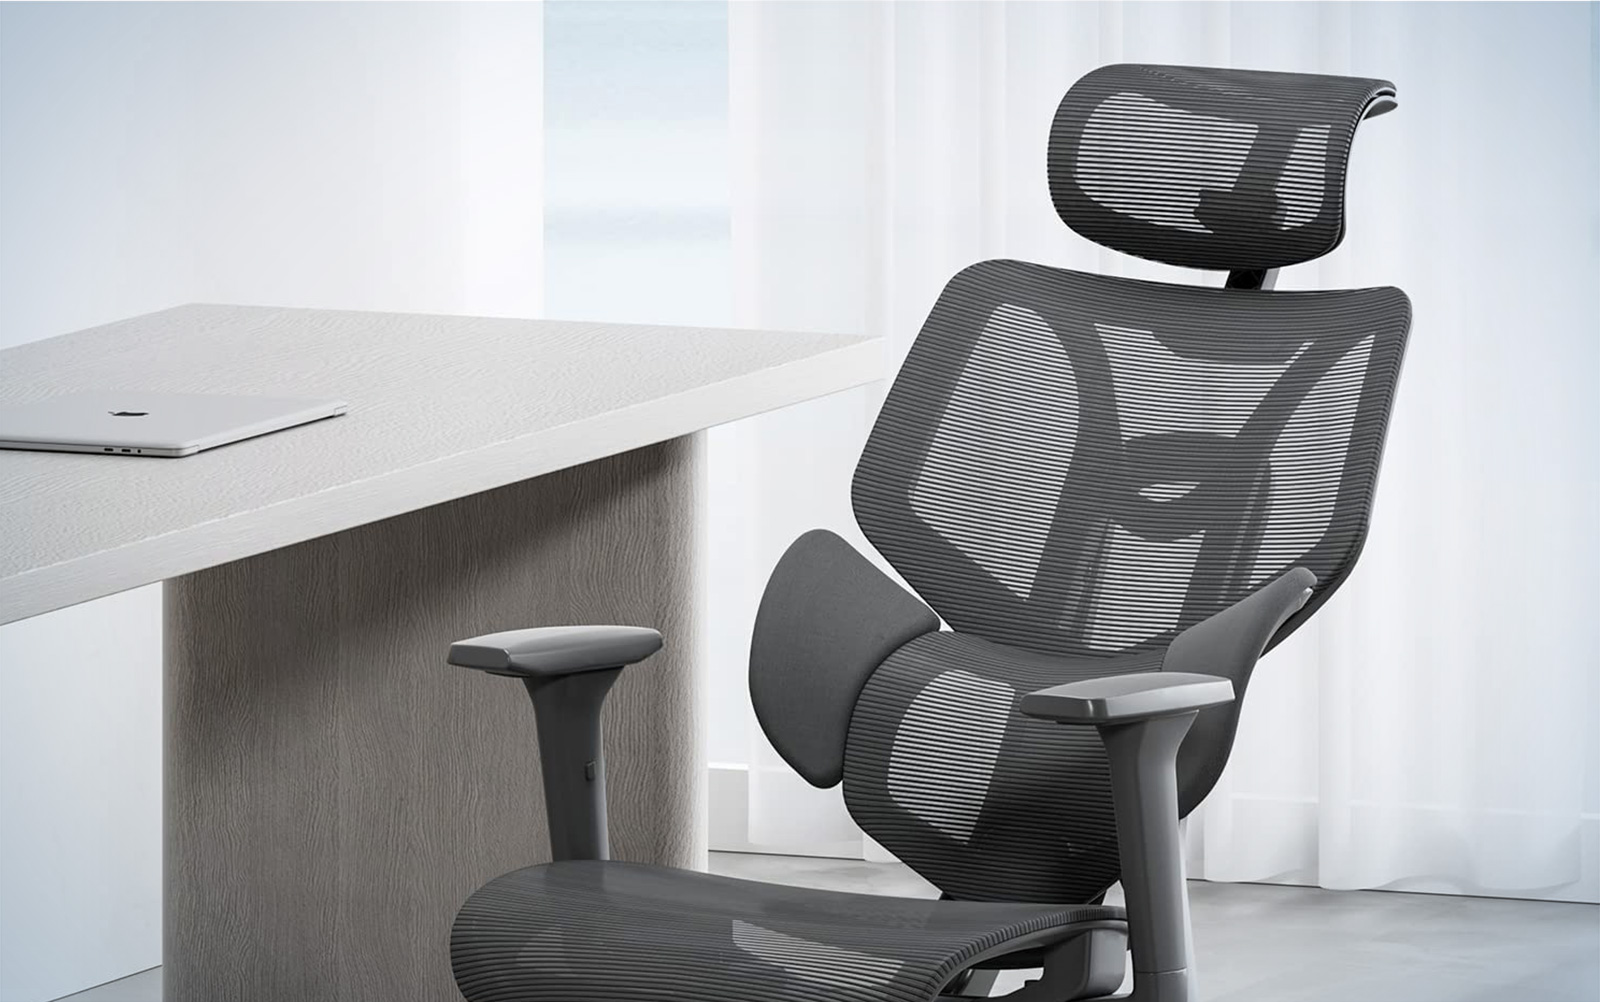 The hbada office chair for lumbar support in black